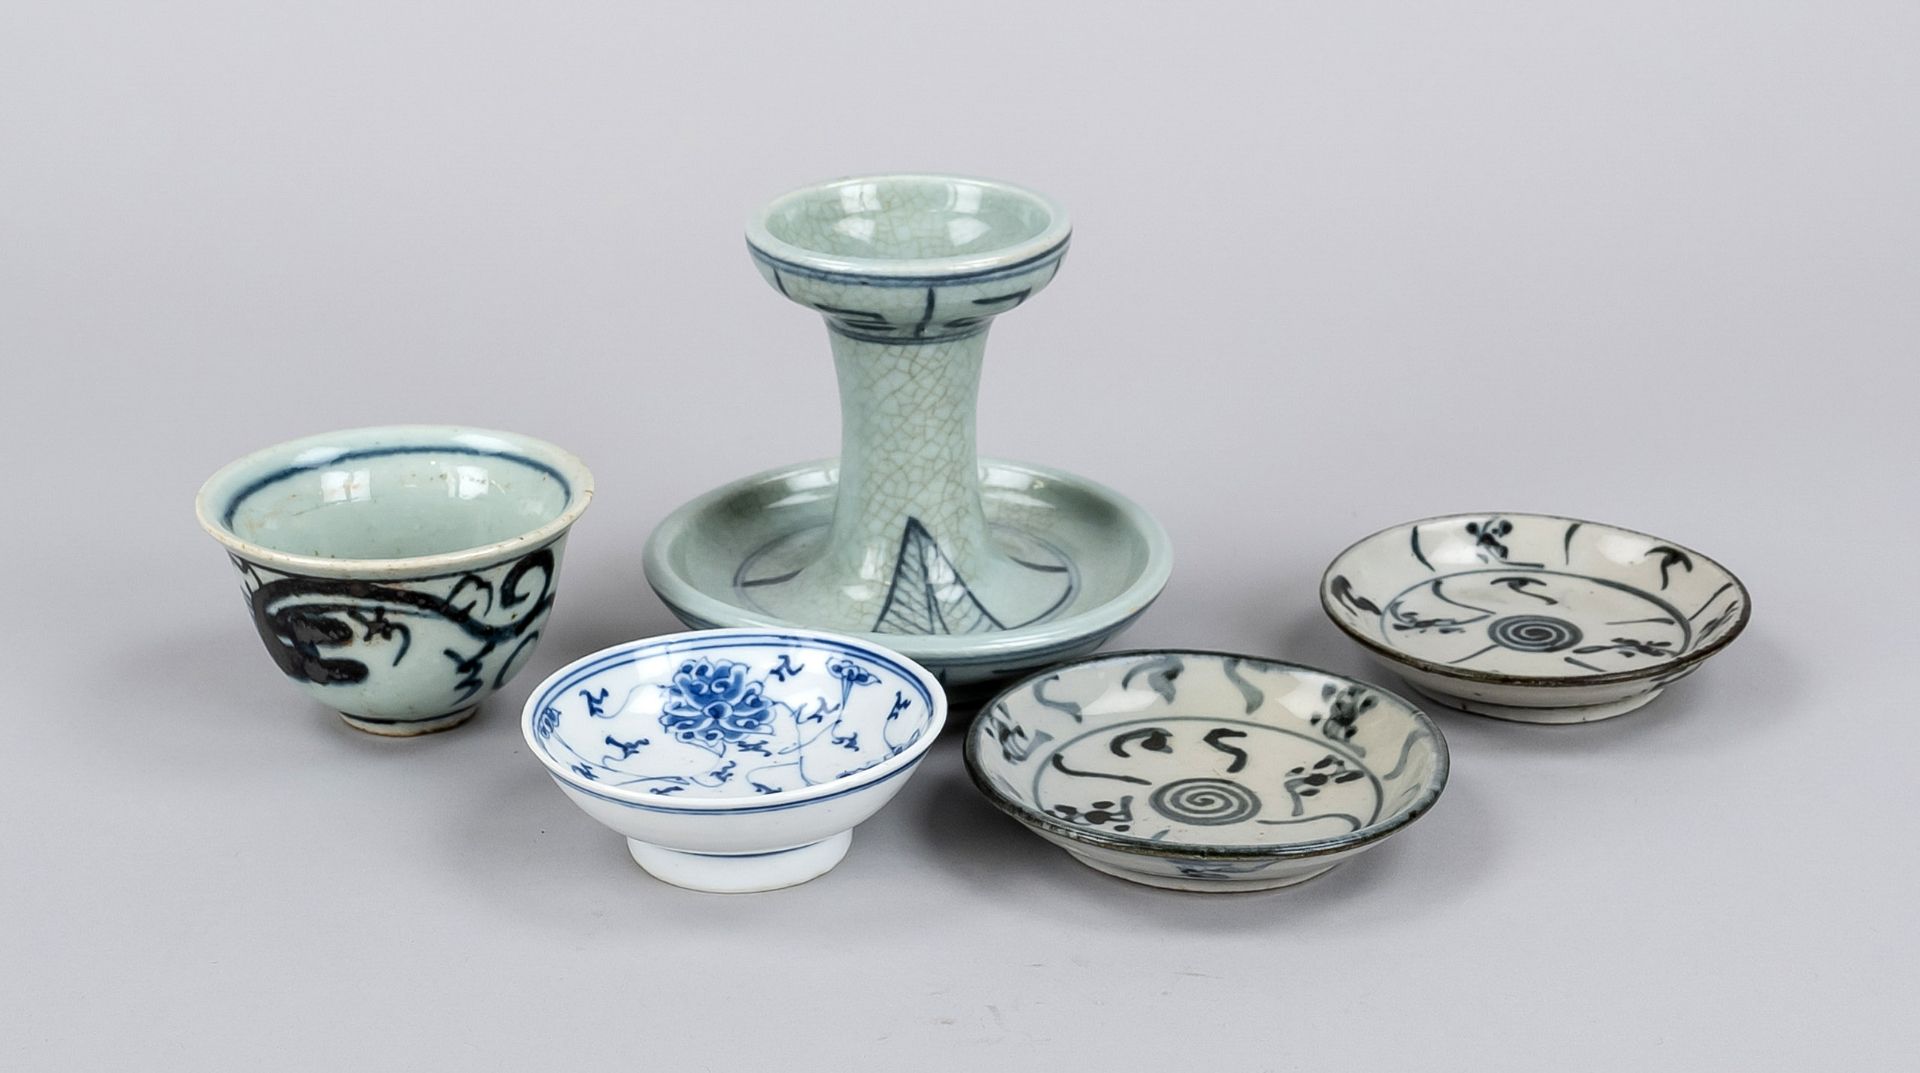 mixed lot of 5 porcelains, China, Qing dynasty(1644-1911), 17th-19th c., 1 small pot on stand c.